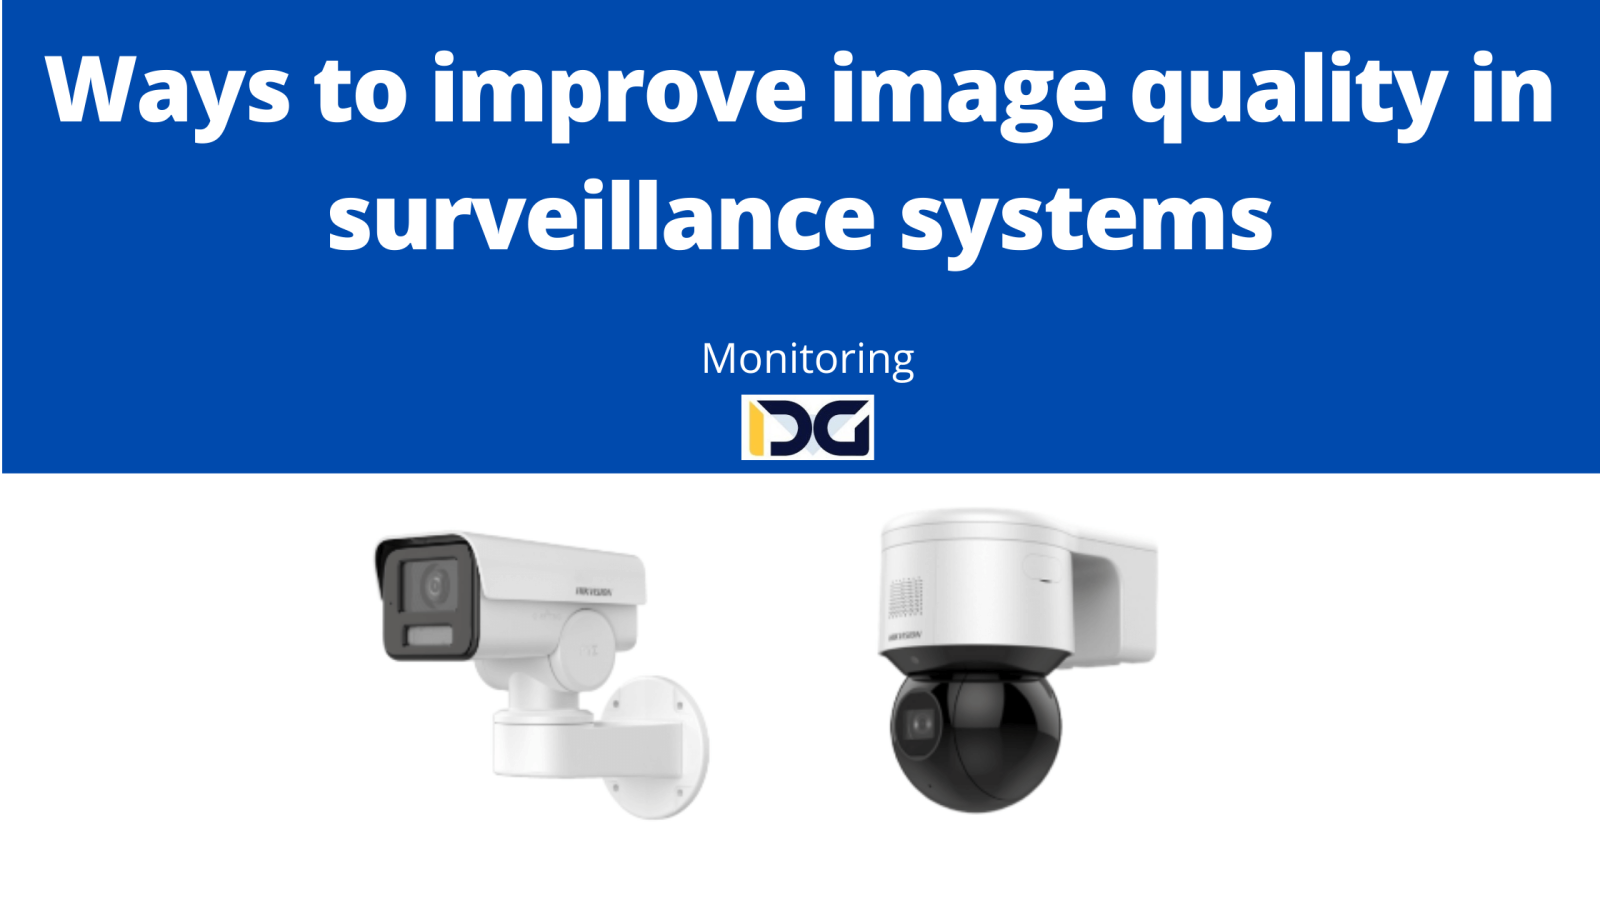 Ways to improve image quality in surveillance systems